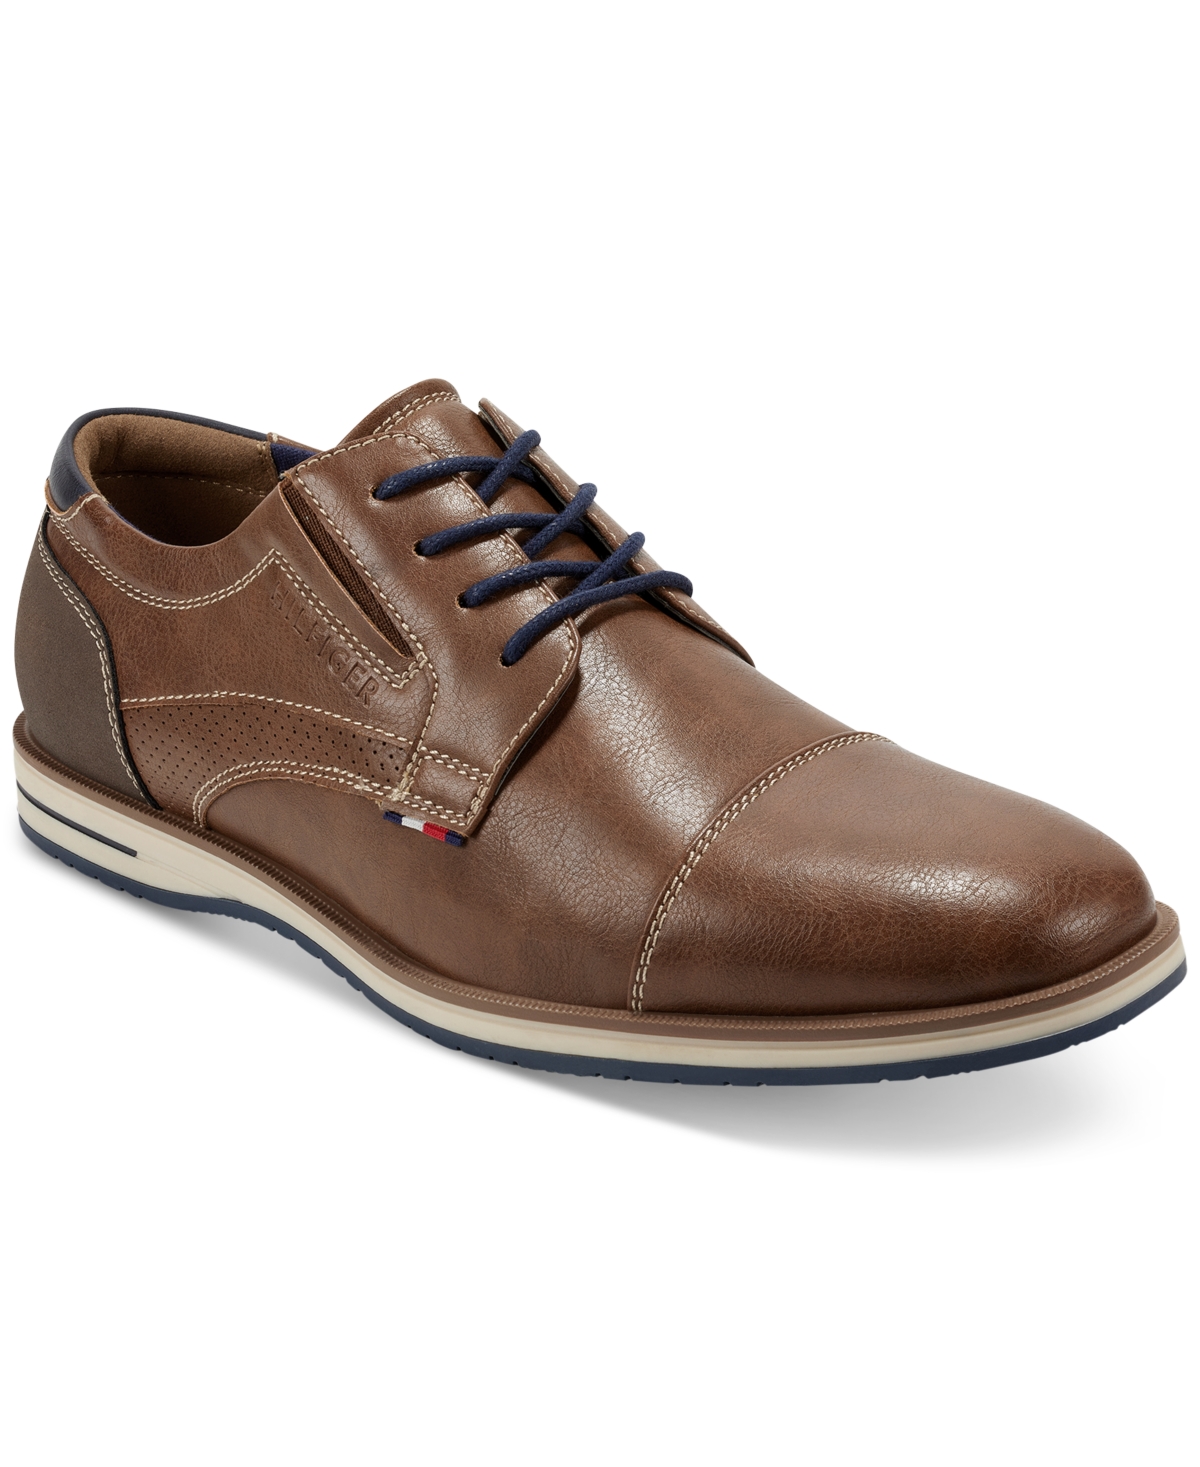 UPC 194009423905 product image for Tommy Hilfiger Men's Urban Casual Oxford Shoes Men's Shoes | upcitemdb.com